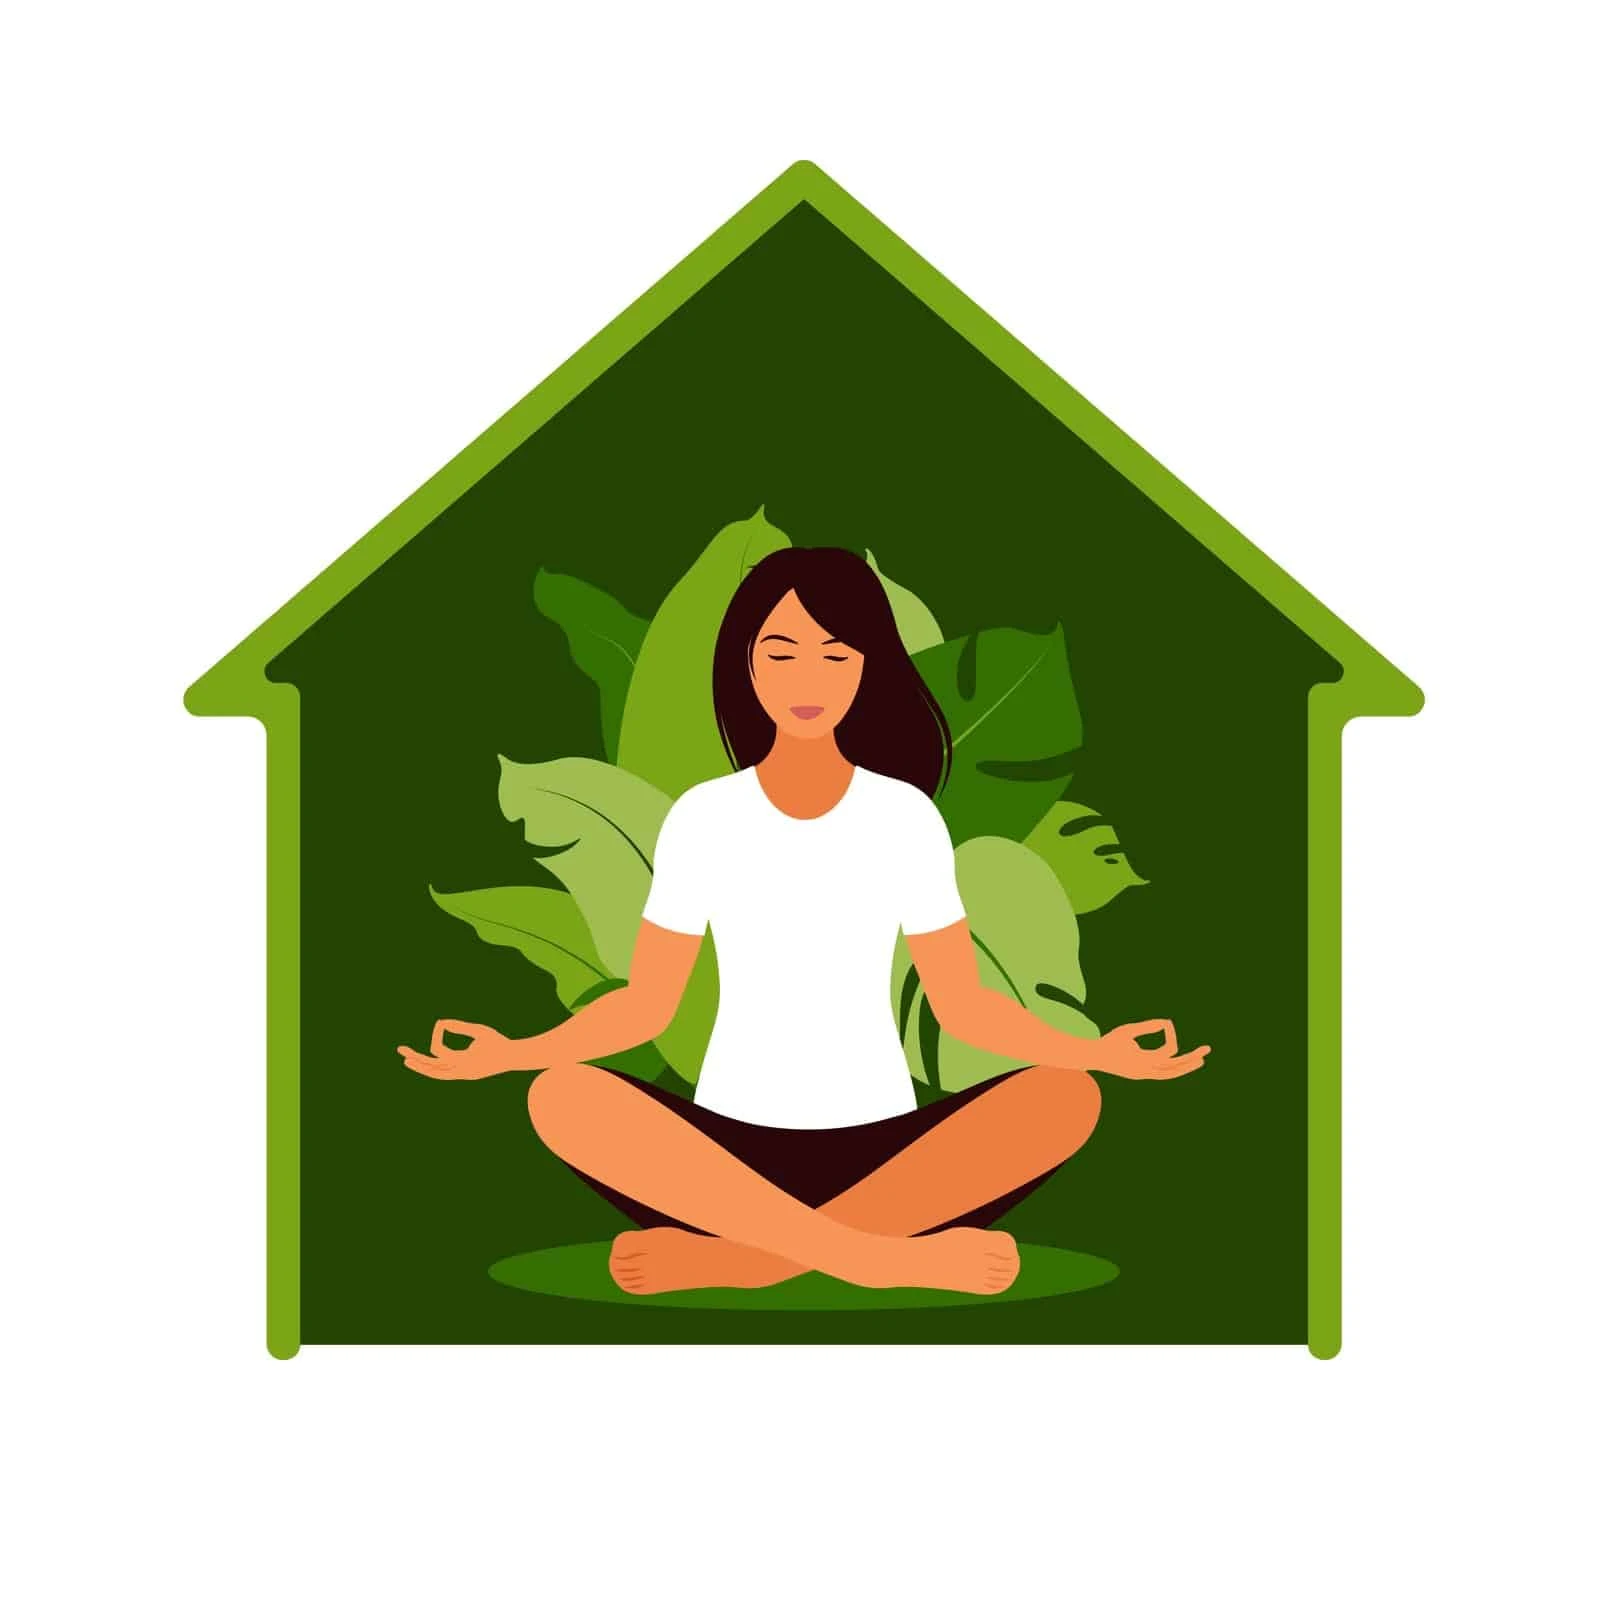 woman-meditating-in-nature-meditation-concept-relax-recreation-healthy-lifestyle-yoga-woman-in-lotus-pose-vector-illustration